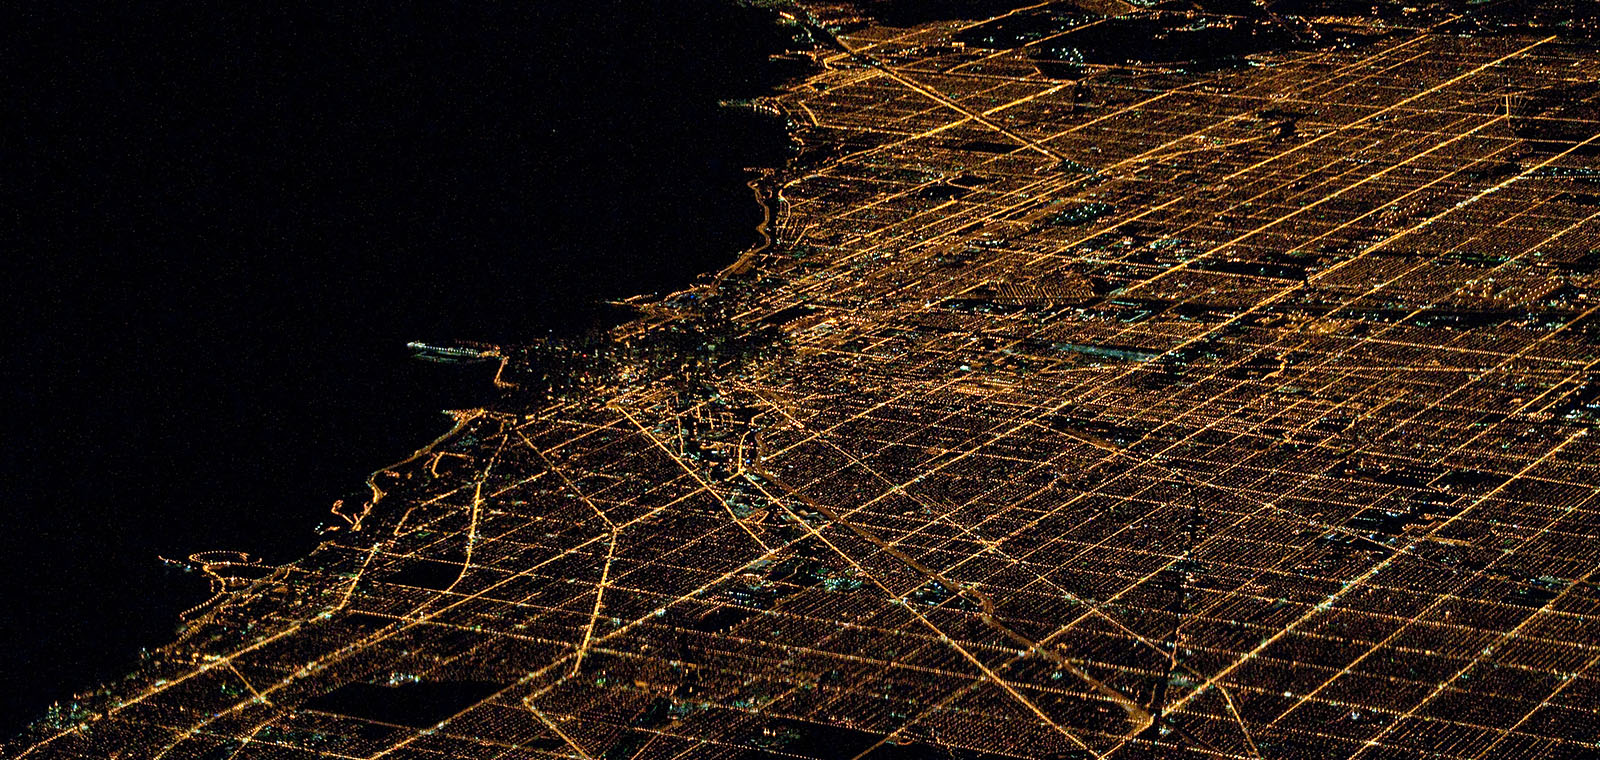 The glowing lights of a large city create web-like patterns in the dark night.